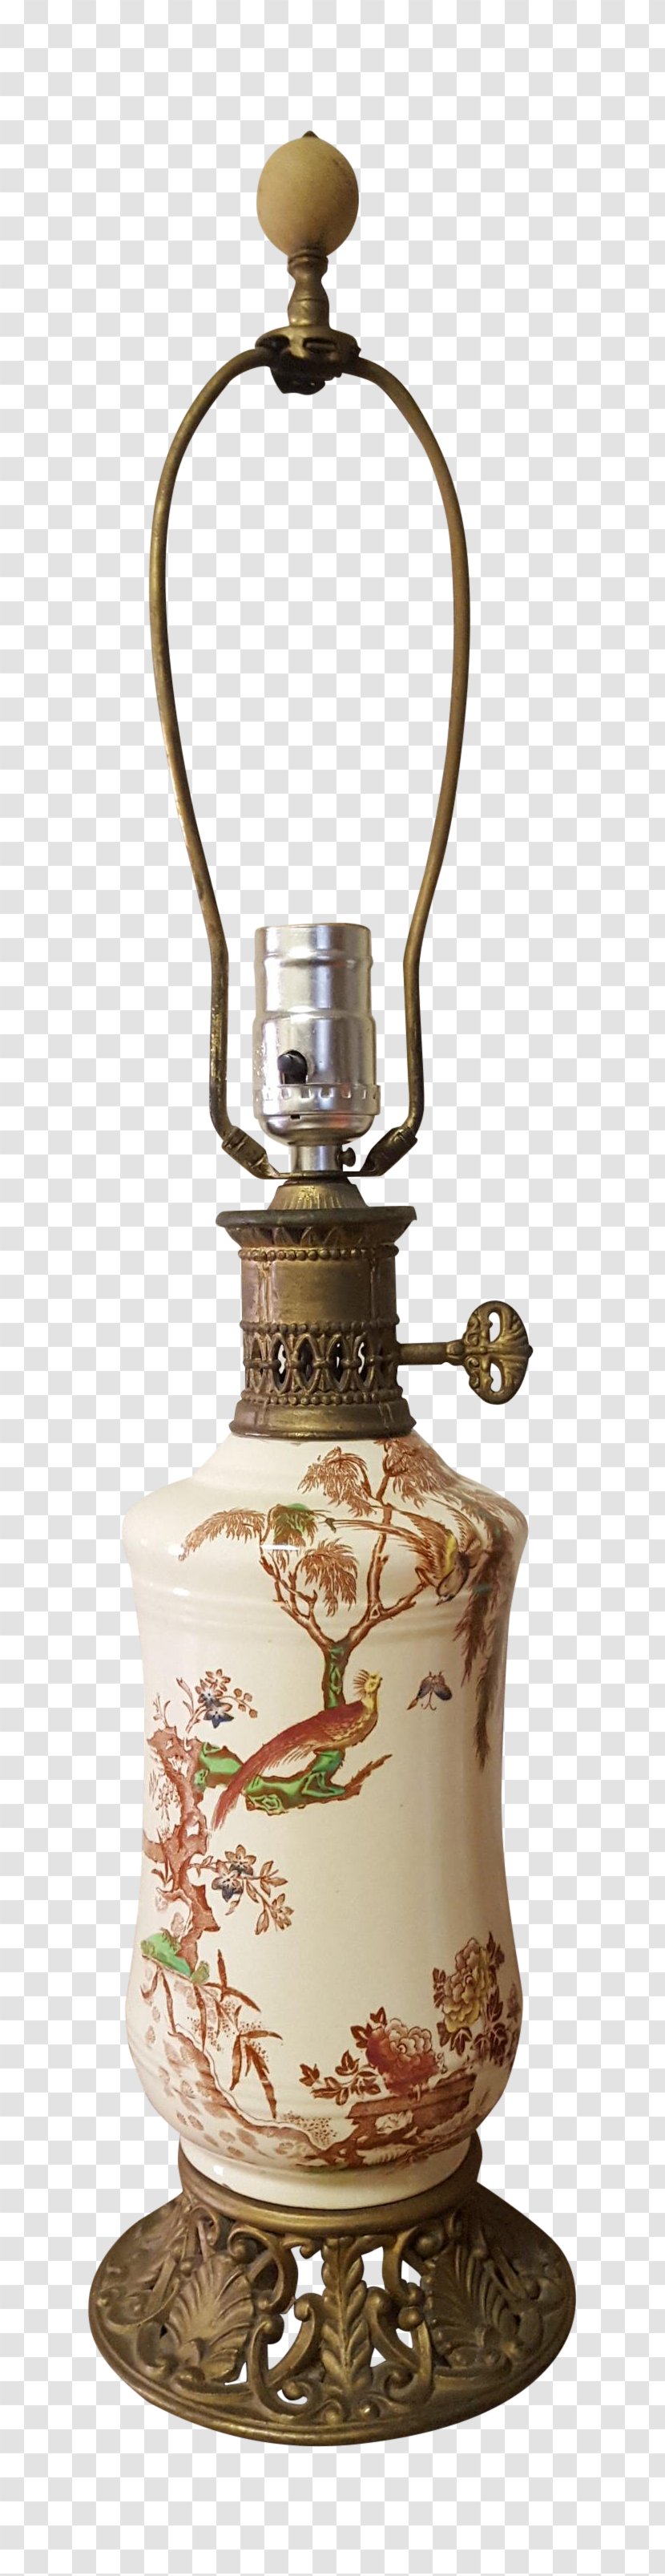 01504 - Kettle - Hand-painted Lamp Transparent PNG